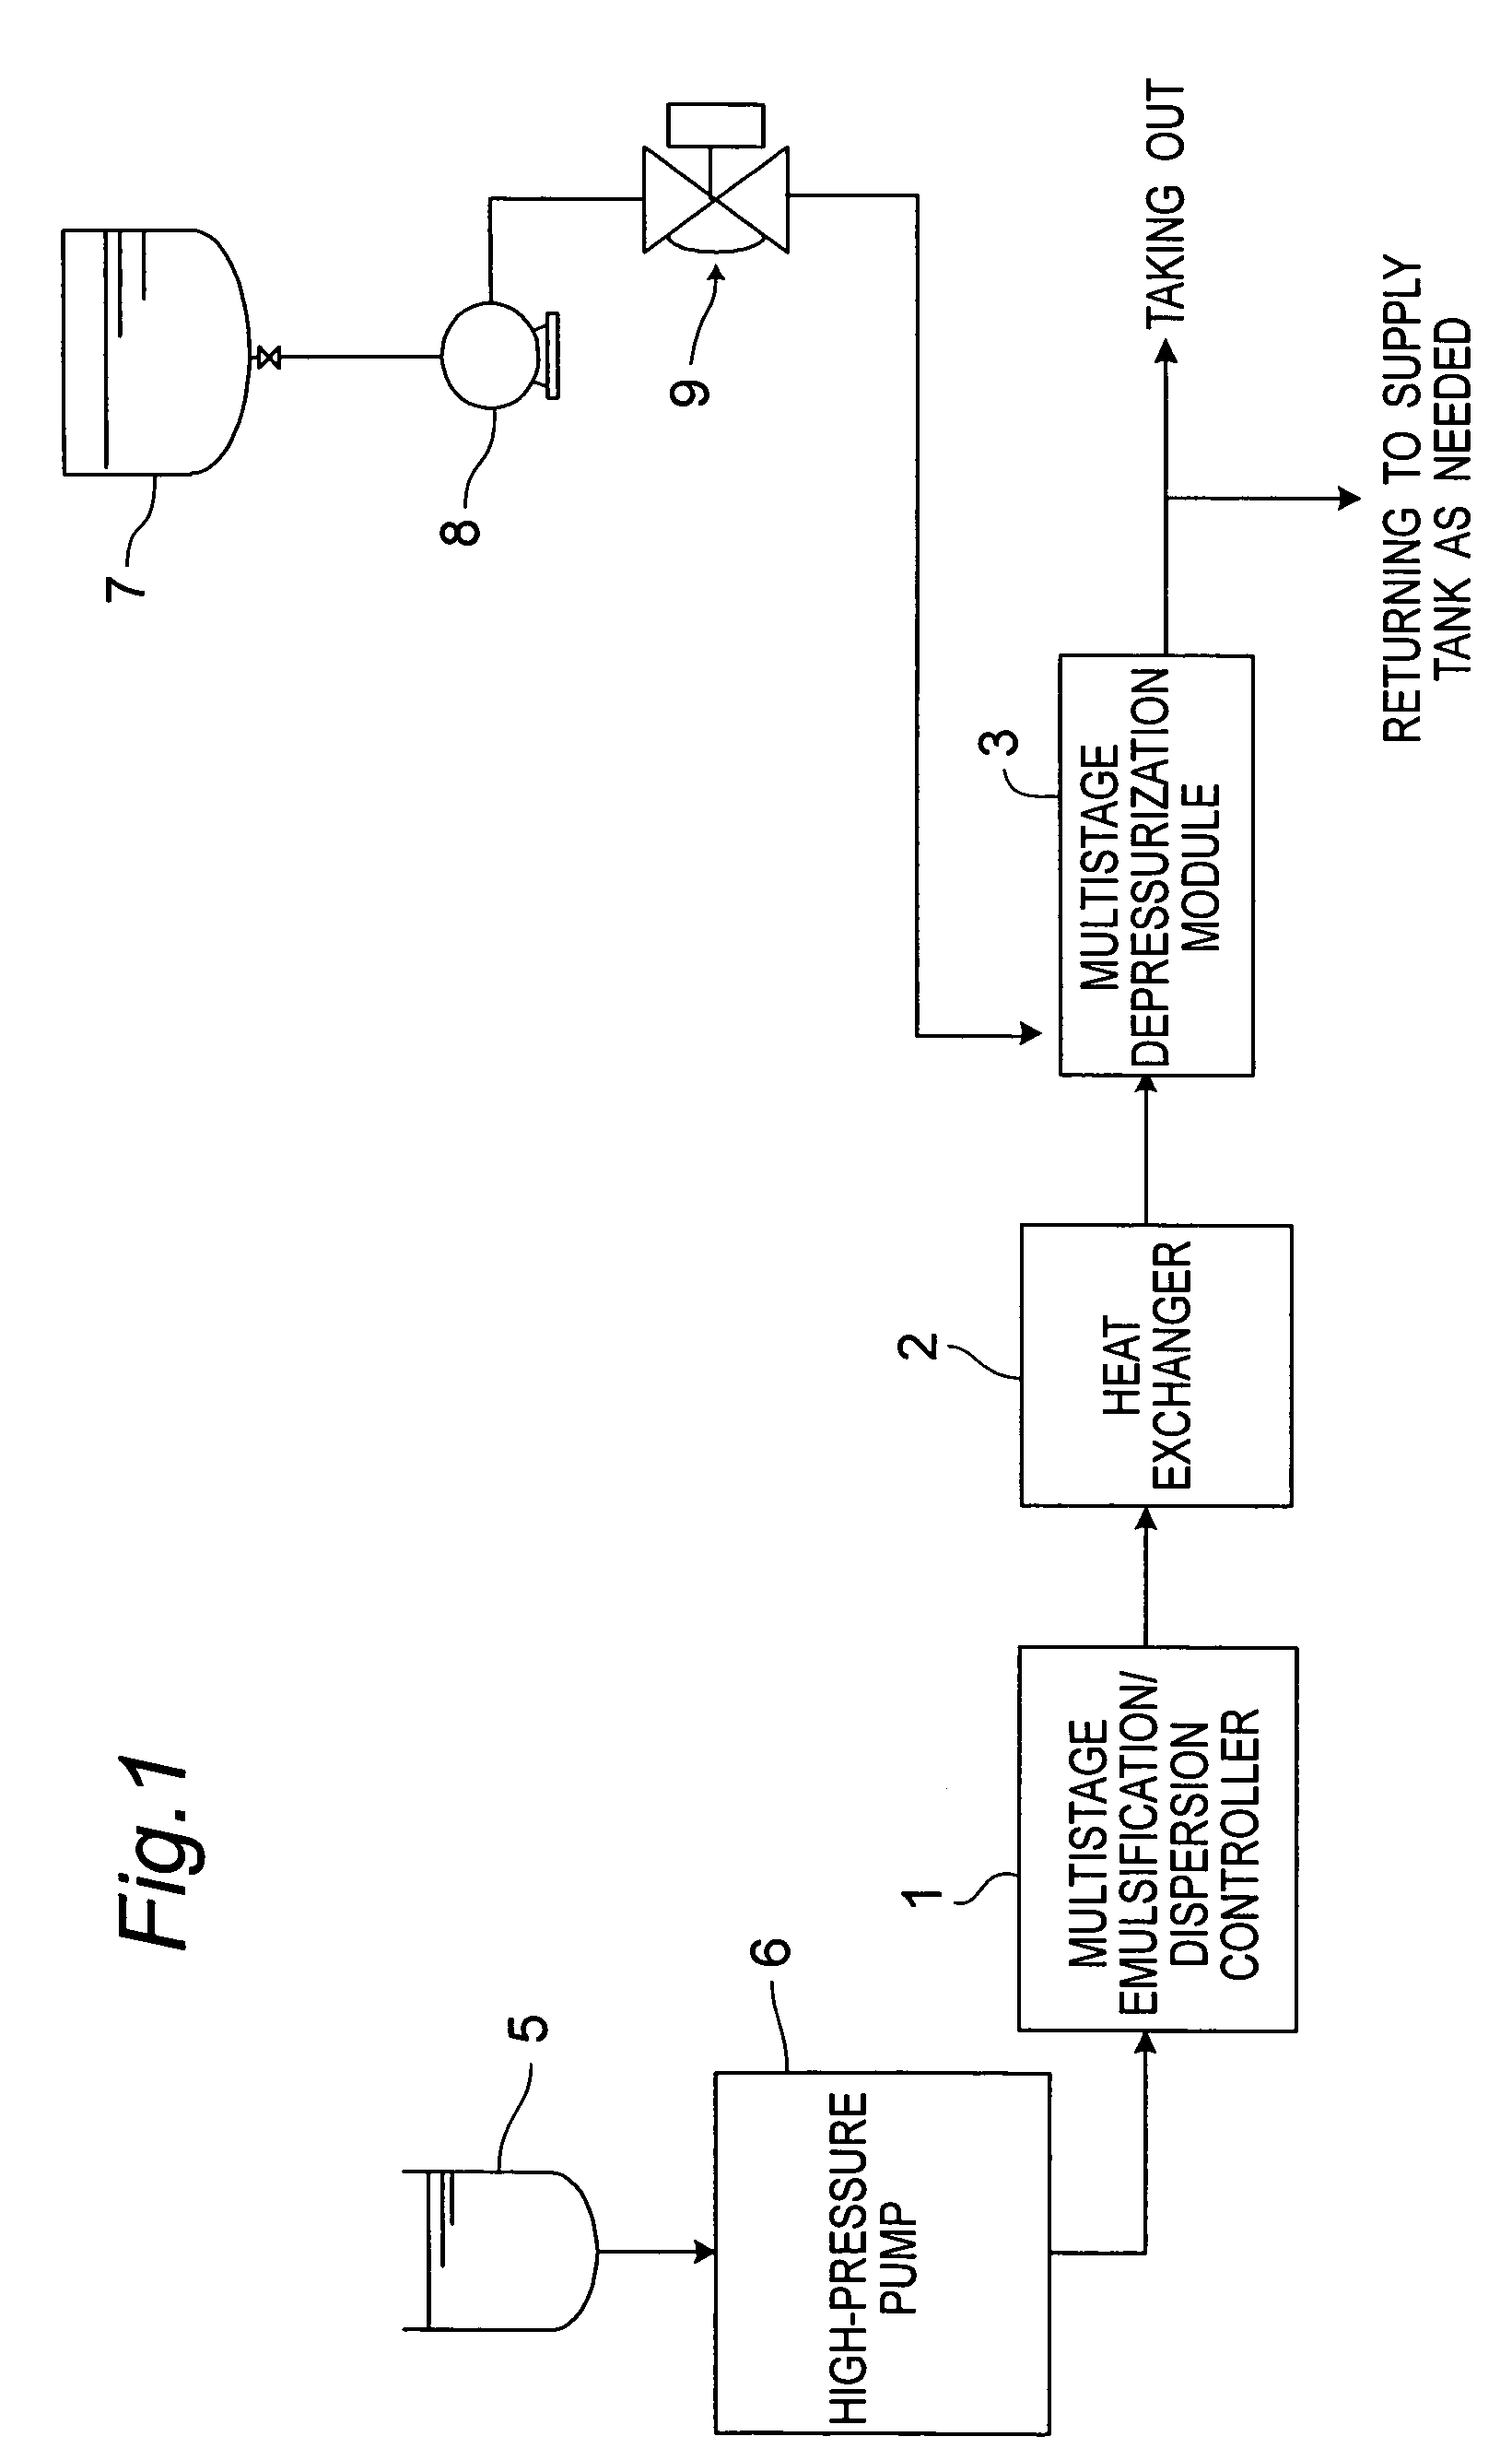 Emulsification/dispersion system using multistage depressurization module and method for producing emulsified/dispersed liquid